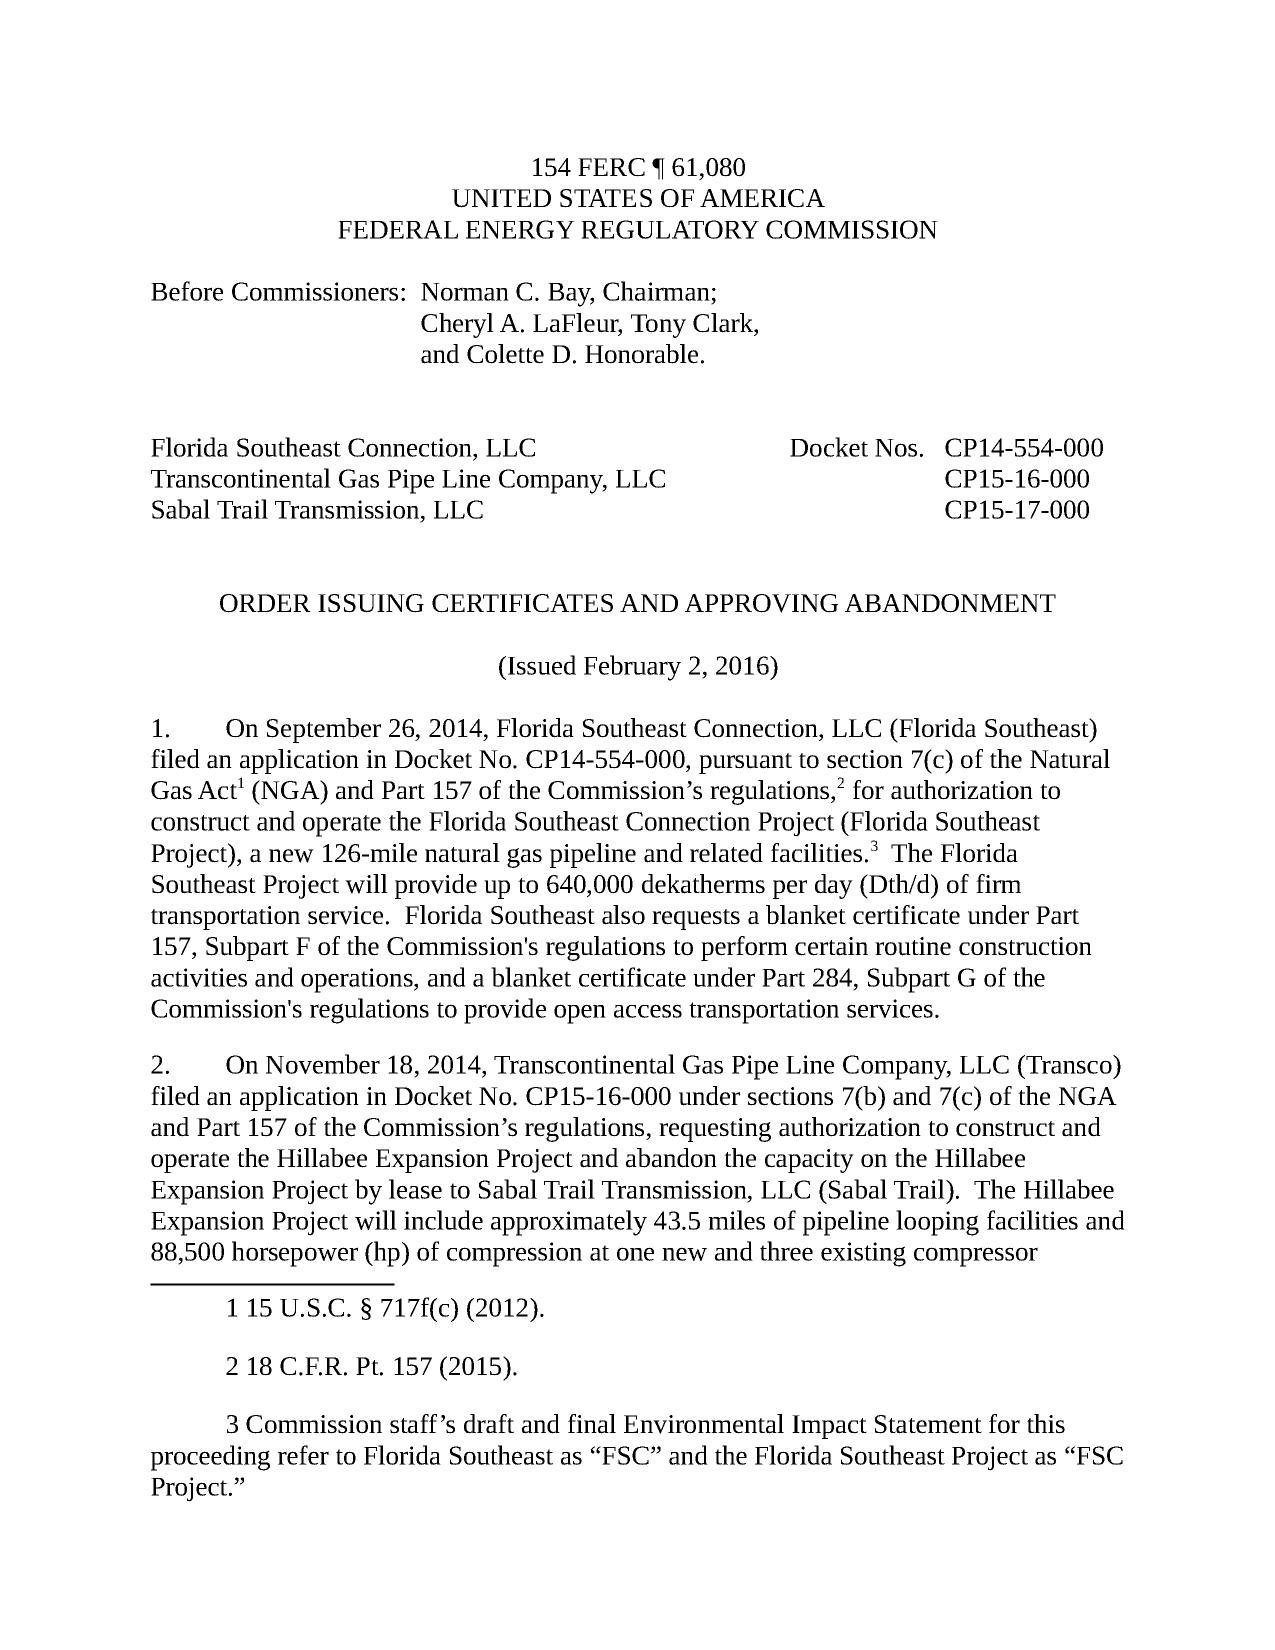 1275x1650 Page 1, in Order issuing certificates for Sabal Trail et al., by FERC, for SpectraBusters.org, 2 February 2016